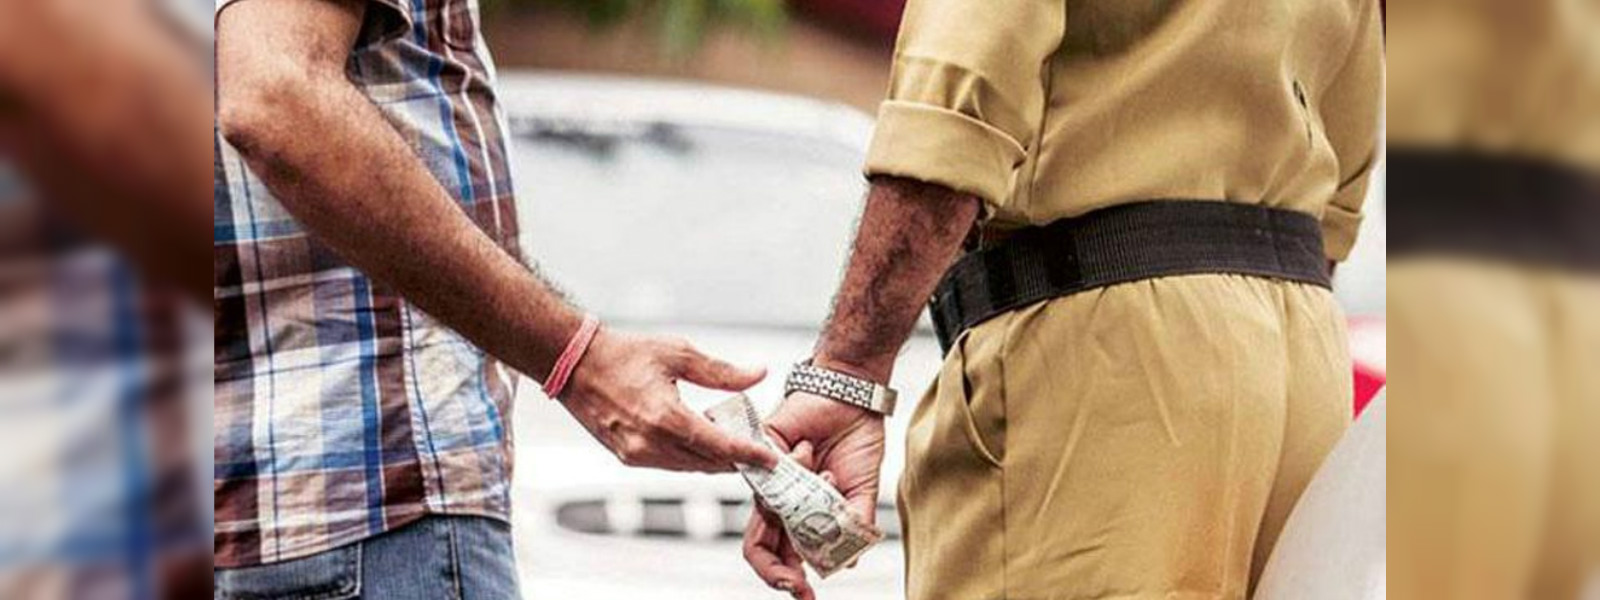 Bribery cases on the rise